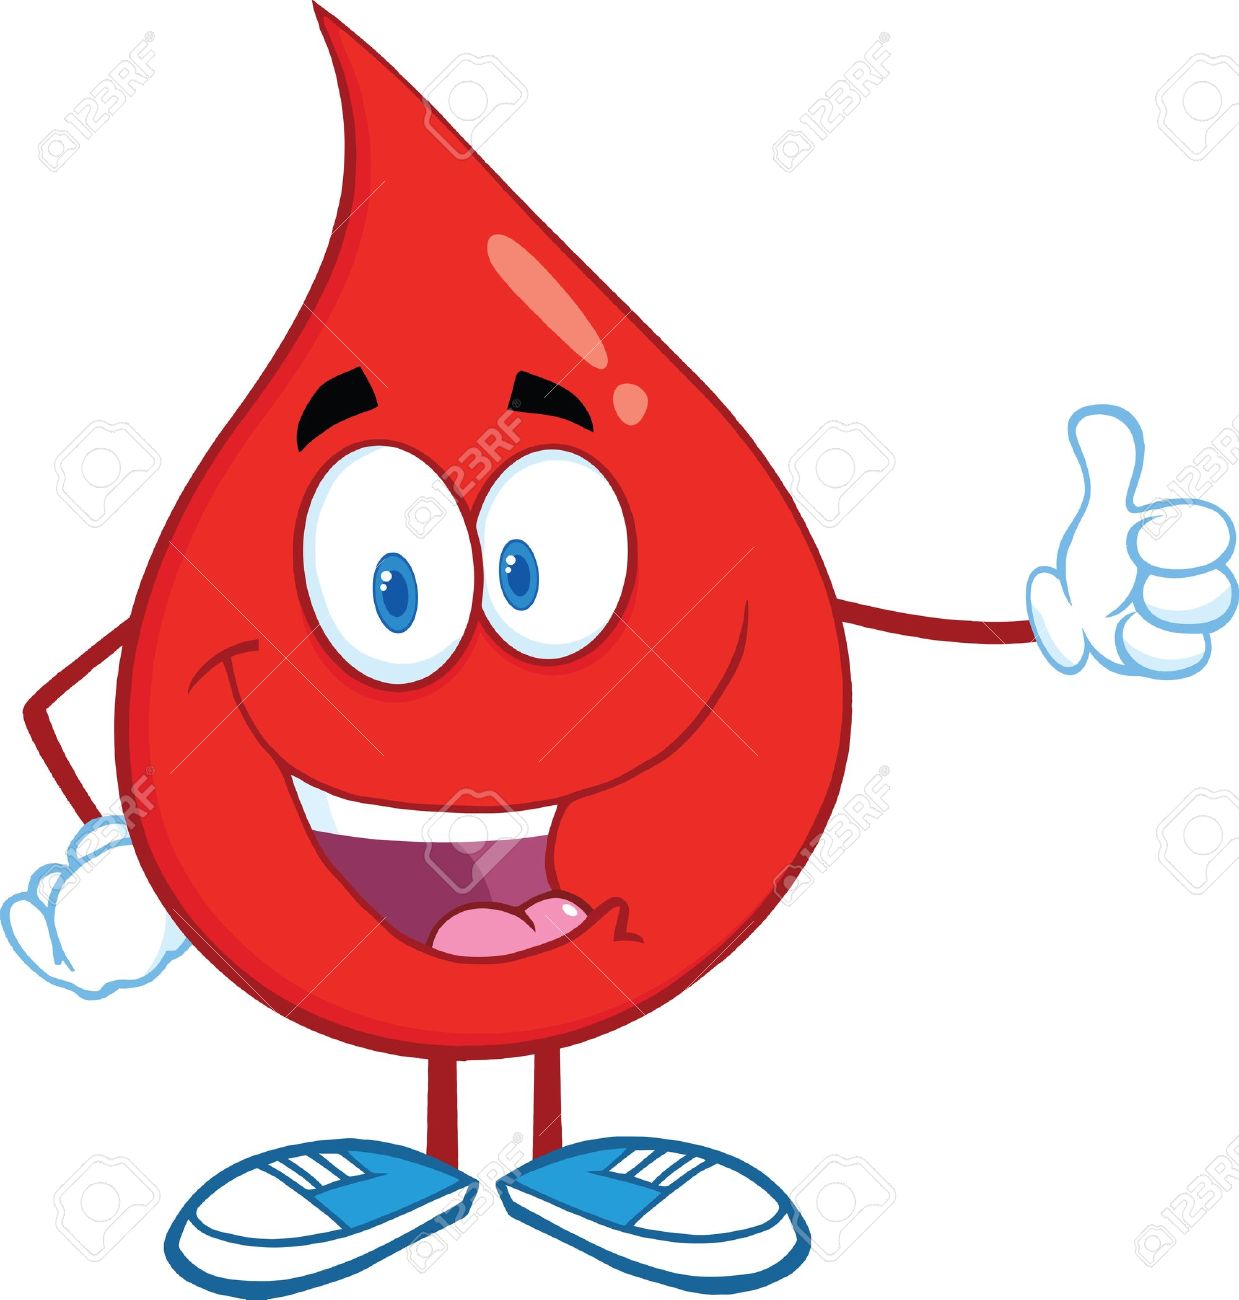 blood clipart picture - photo #45